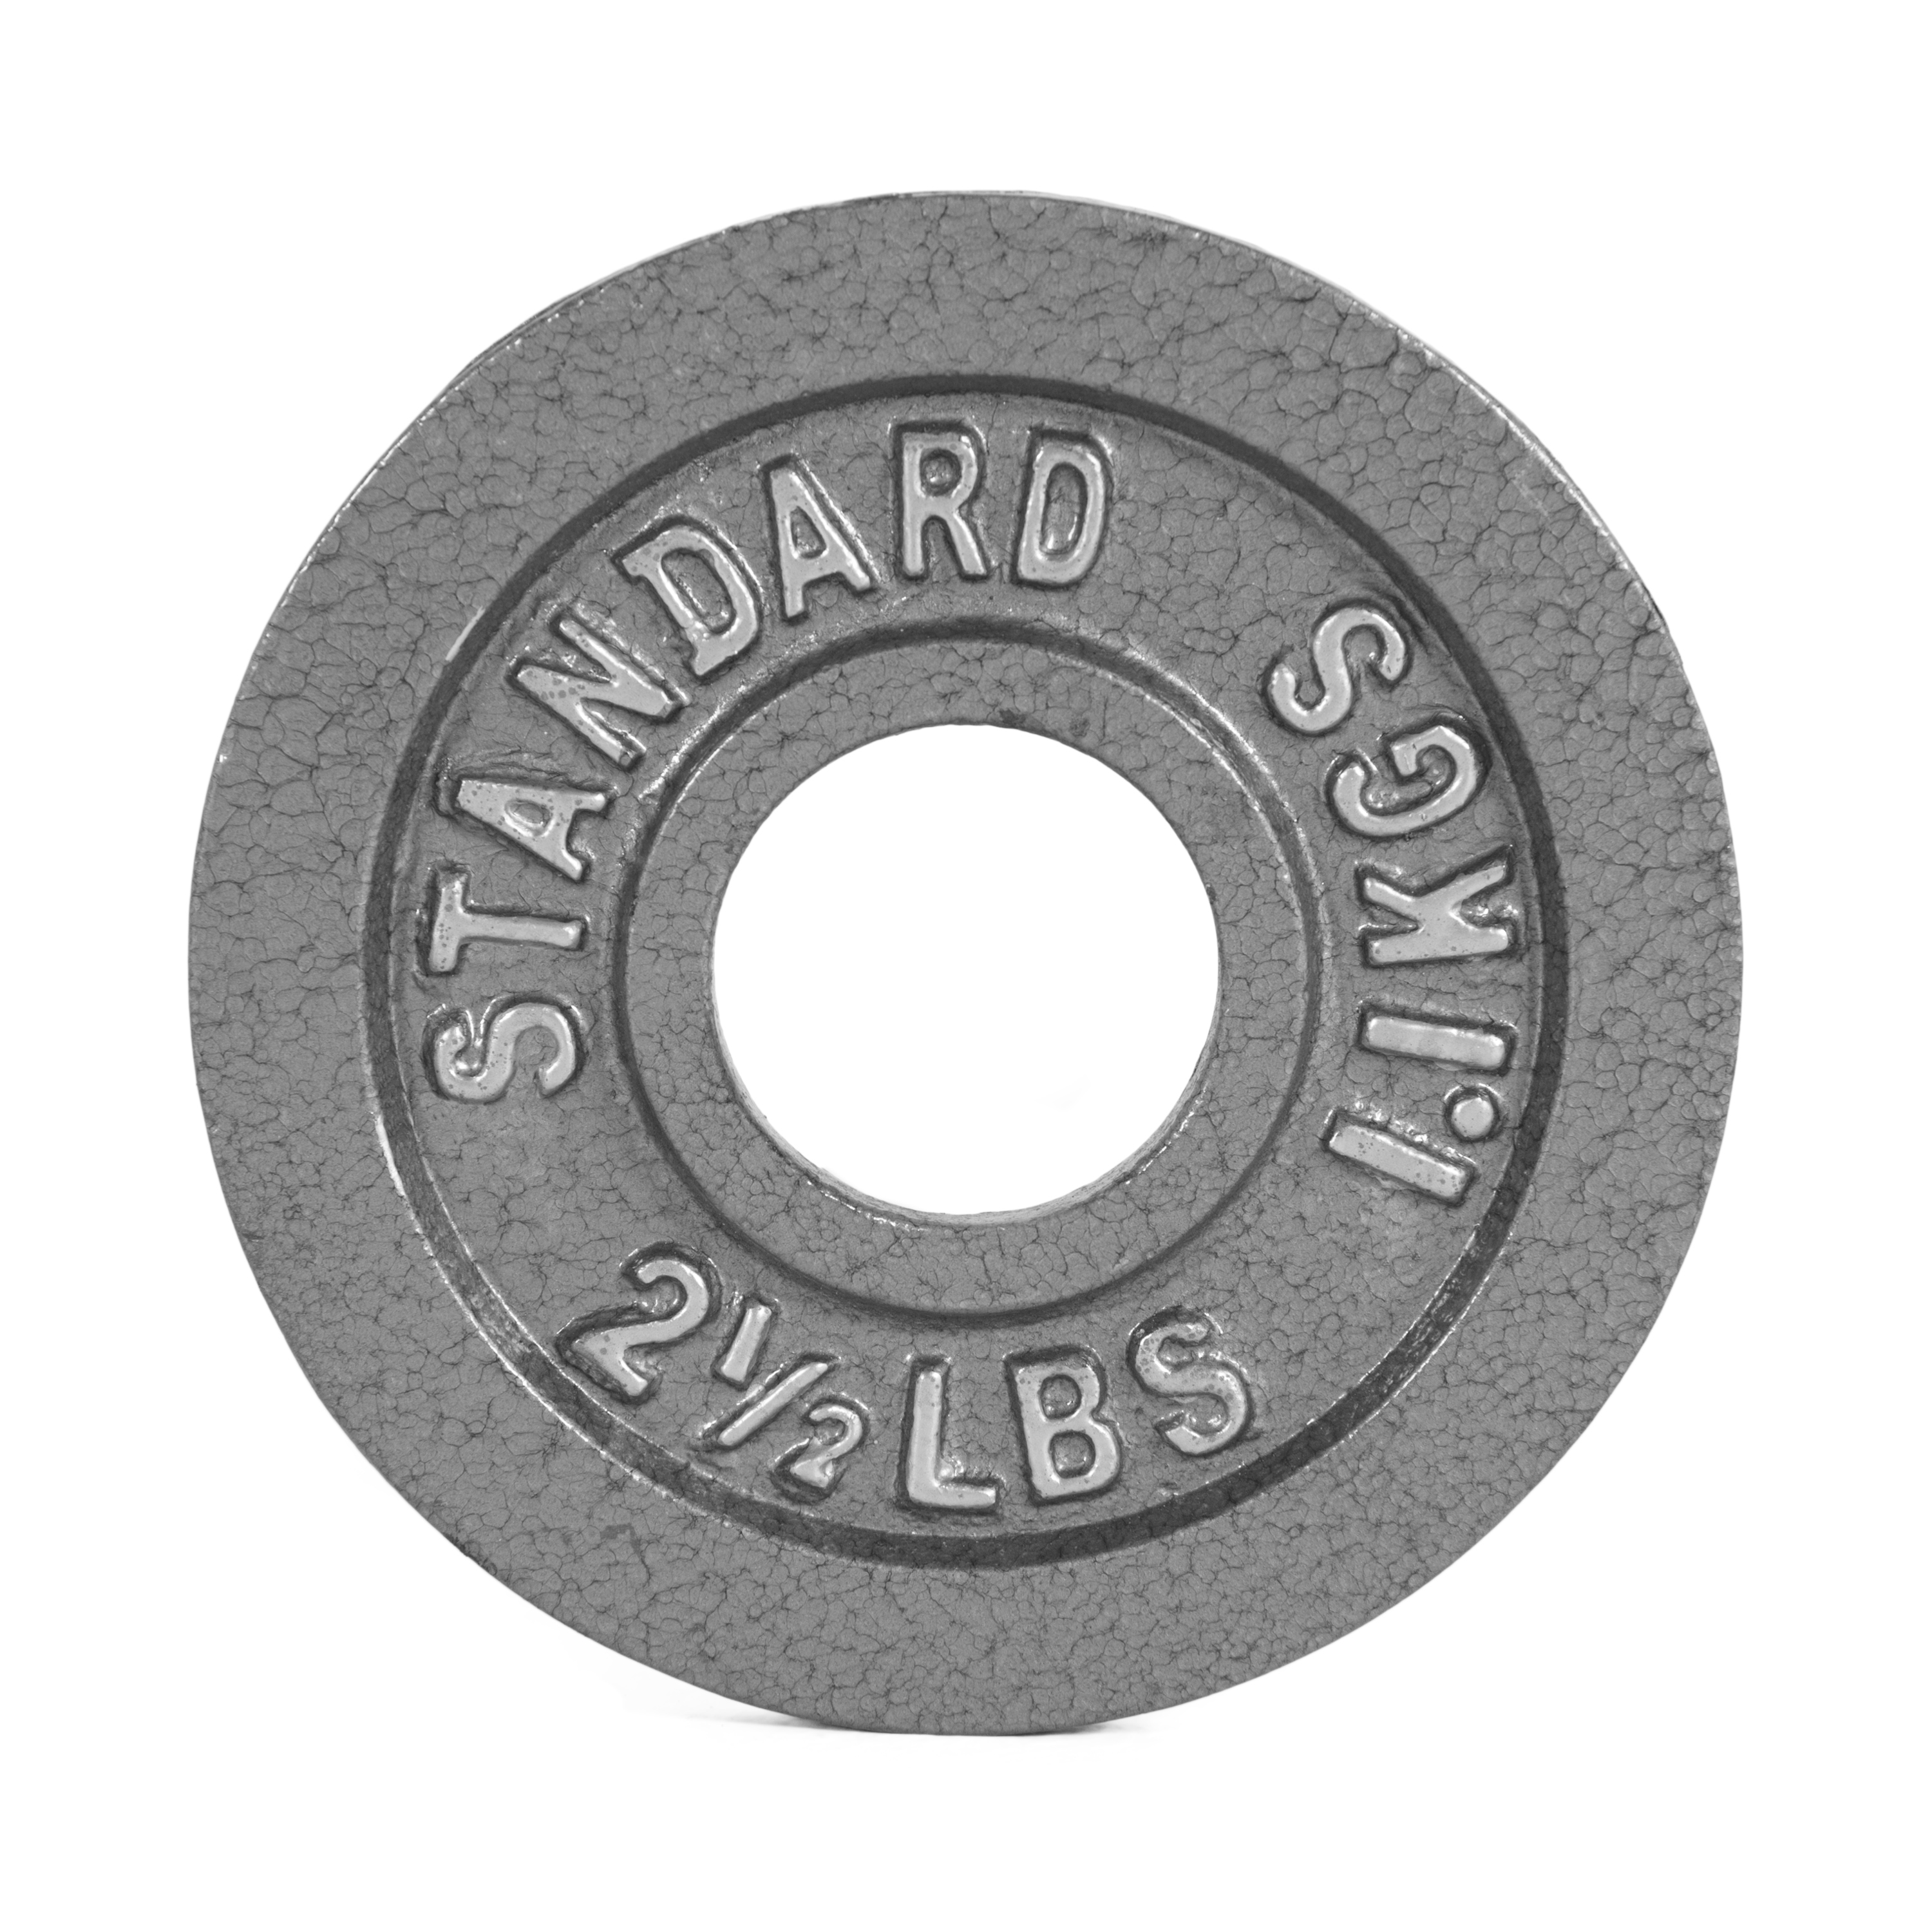 CAP Barbell Gray Olympic Cast Iron Weight Plate, 2.5-100 lb, Singles - image 1 of 2